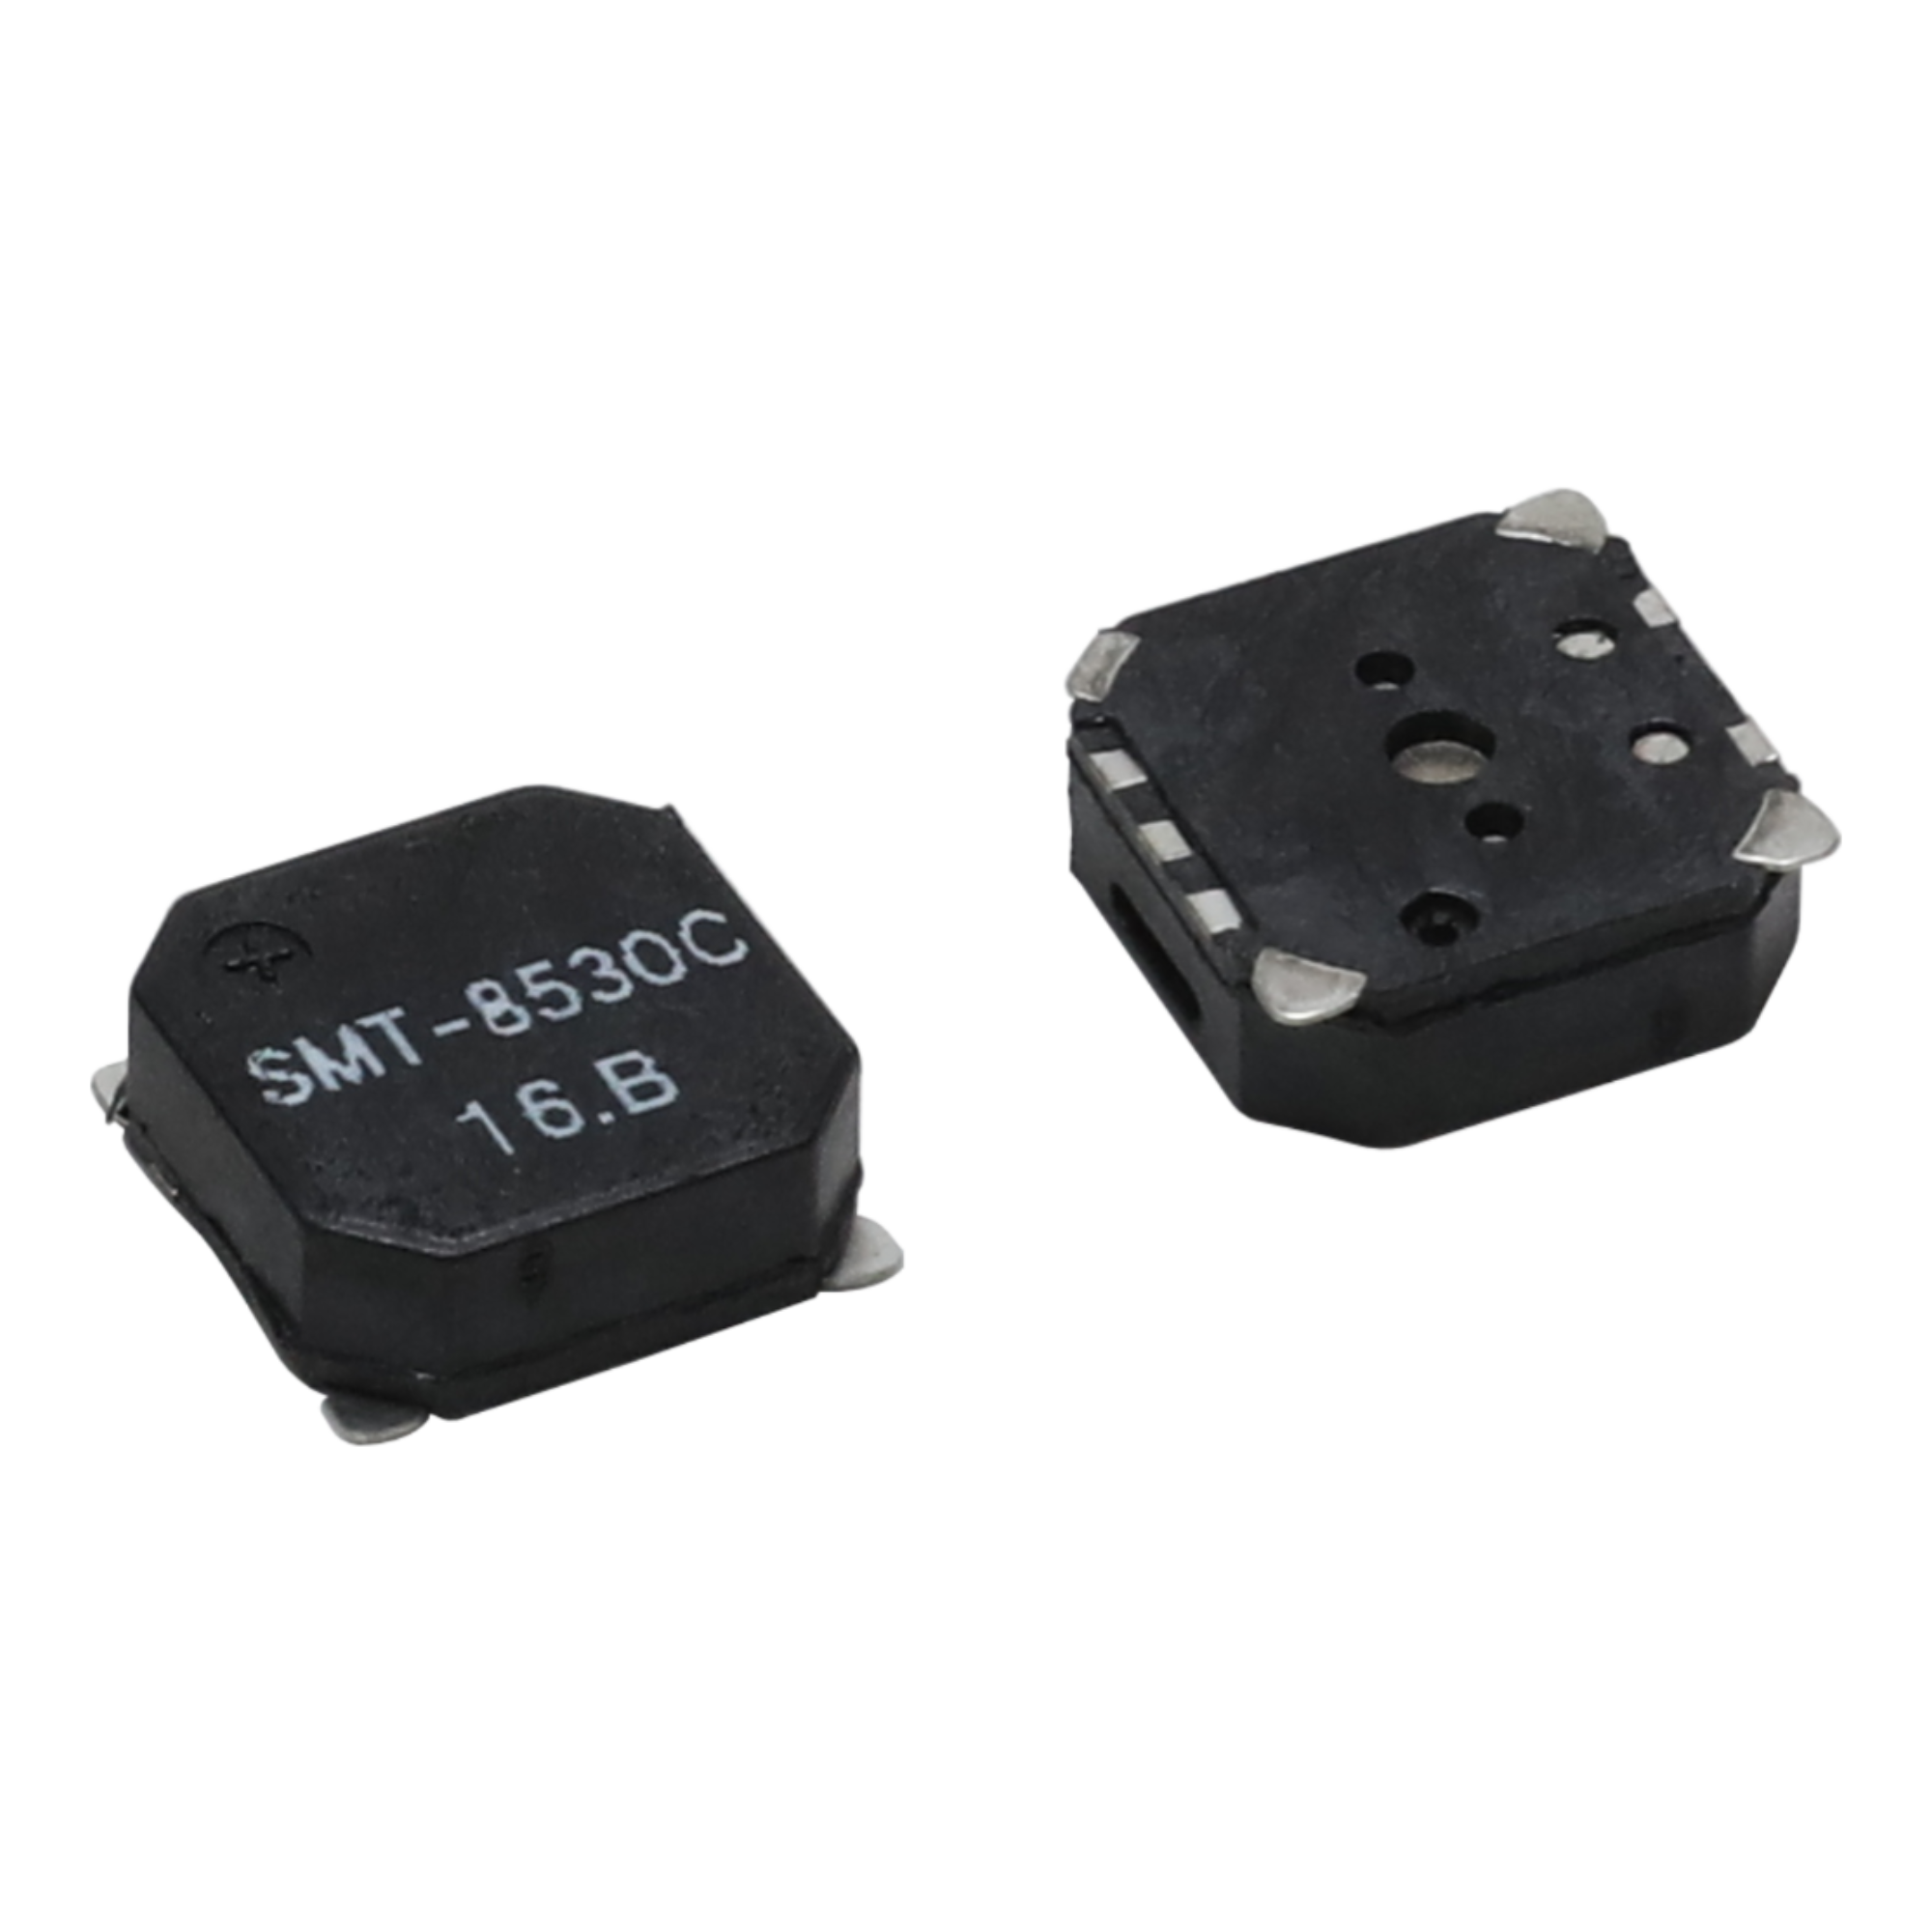 SMD MAGNETIC BUZZER_SMT-8530C.png